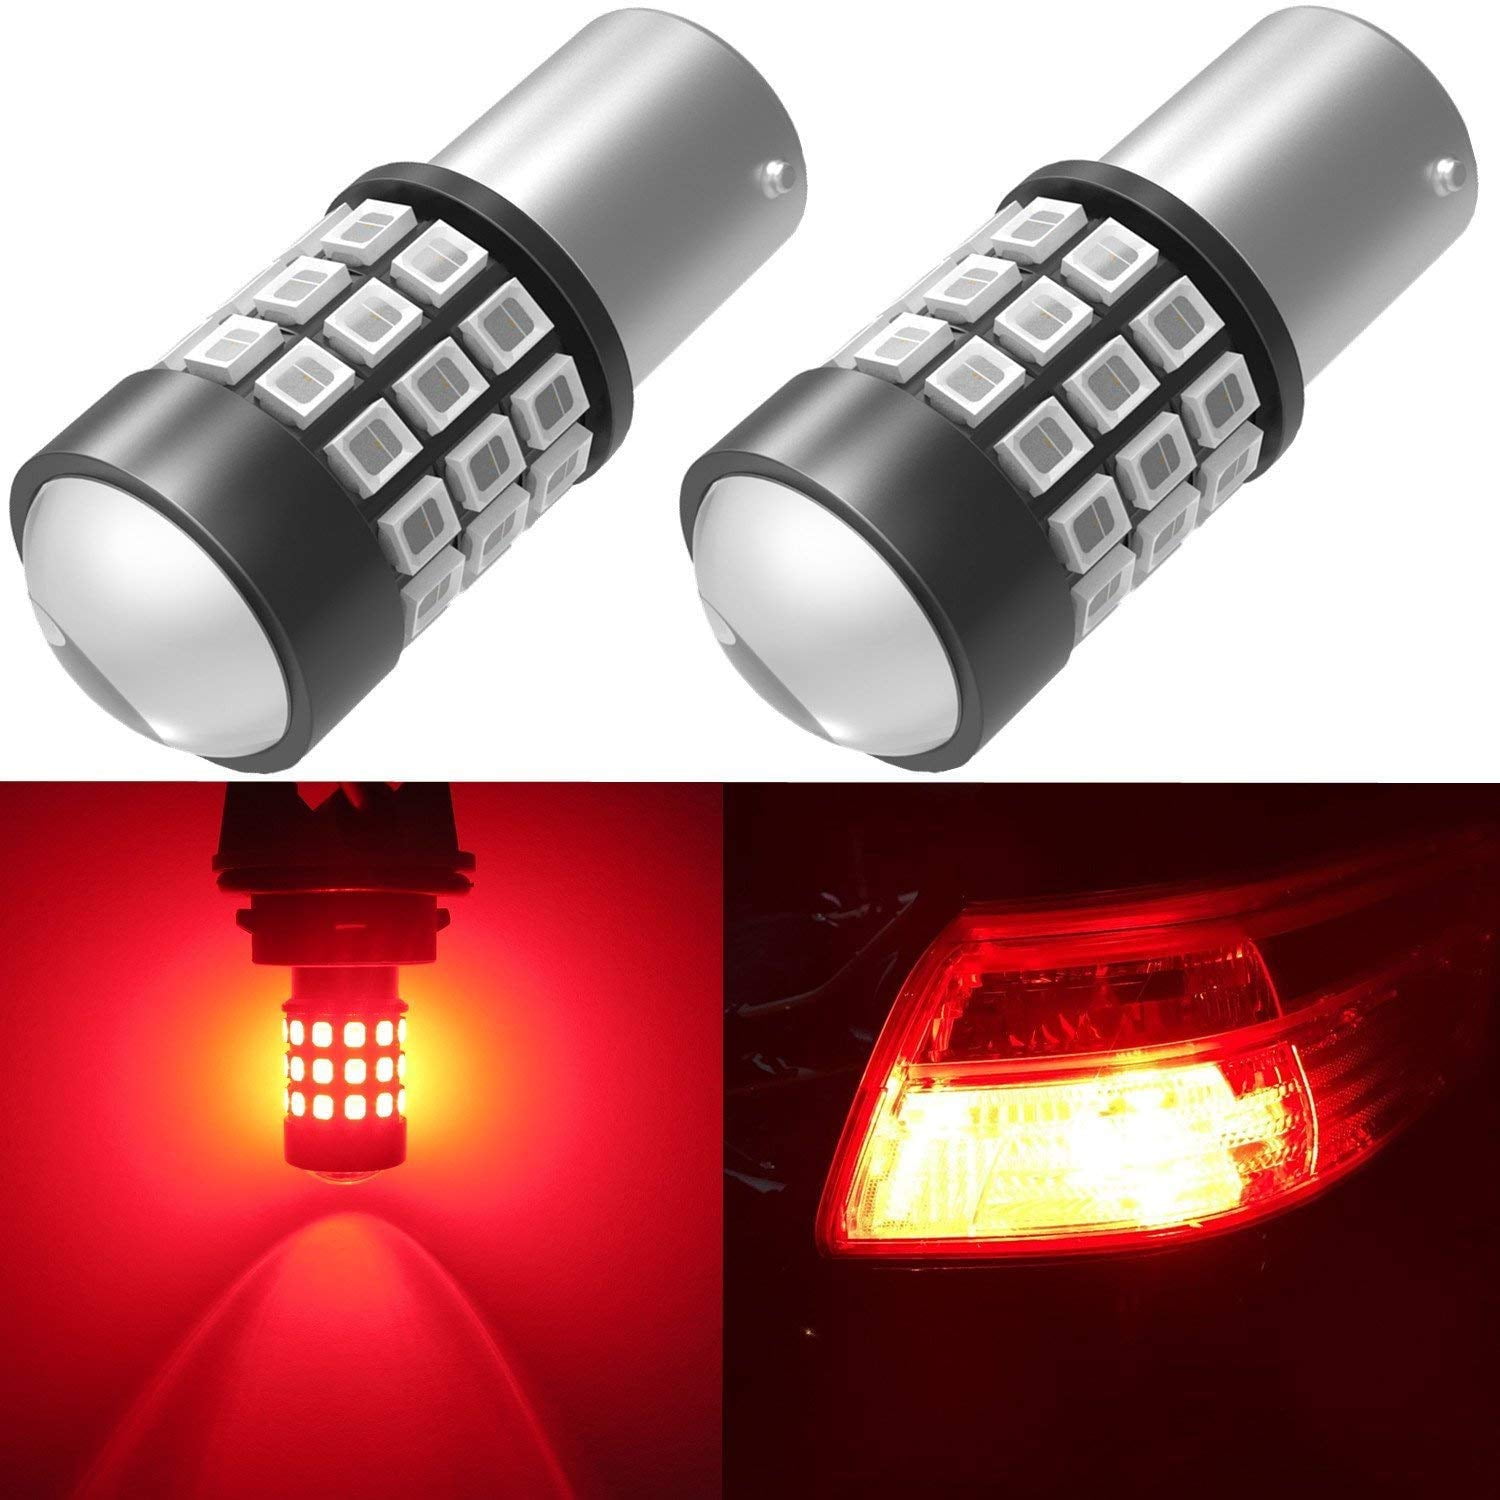 Alla Lighting 1157 7528 LED Strobe Flashing Brake Lights Bulbs 2835-SMD Red LED Stop TaIl Lights Replacement for Cars, Trucks, Motorcycles (Set of 2) - Walmart.com